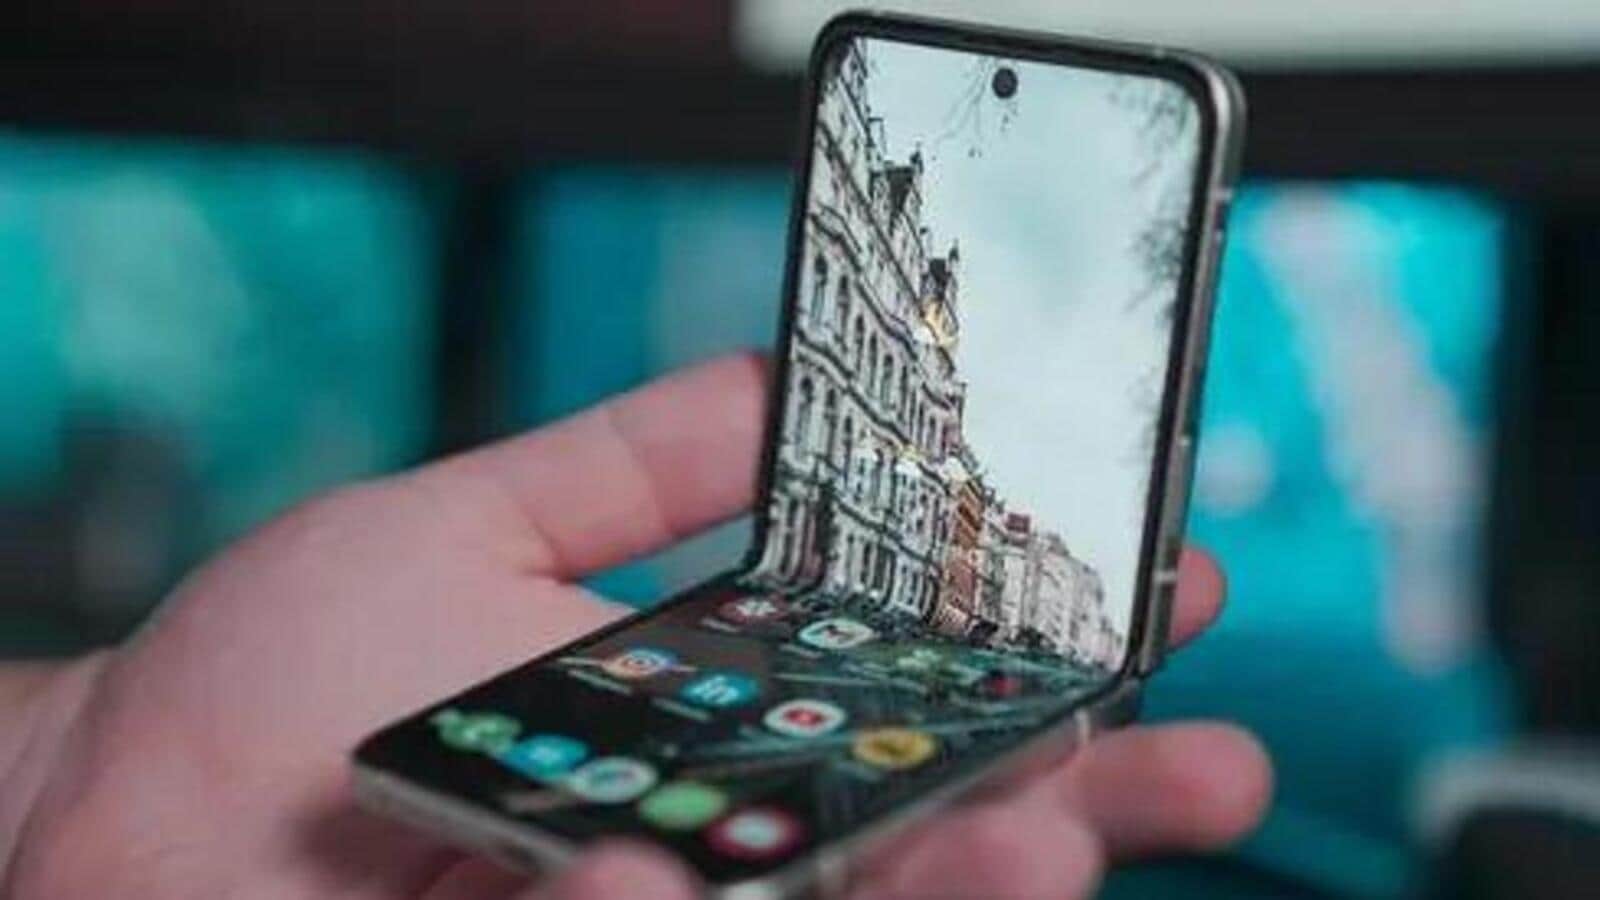 Planning to buy a 5G smartphone? Follow this checklist - Hindustan Times